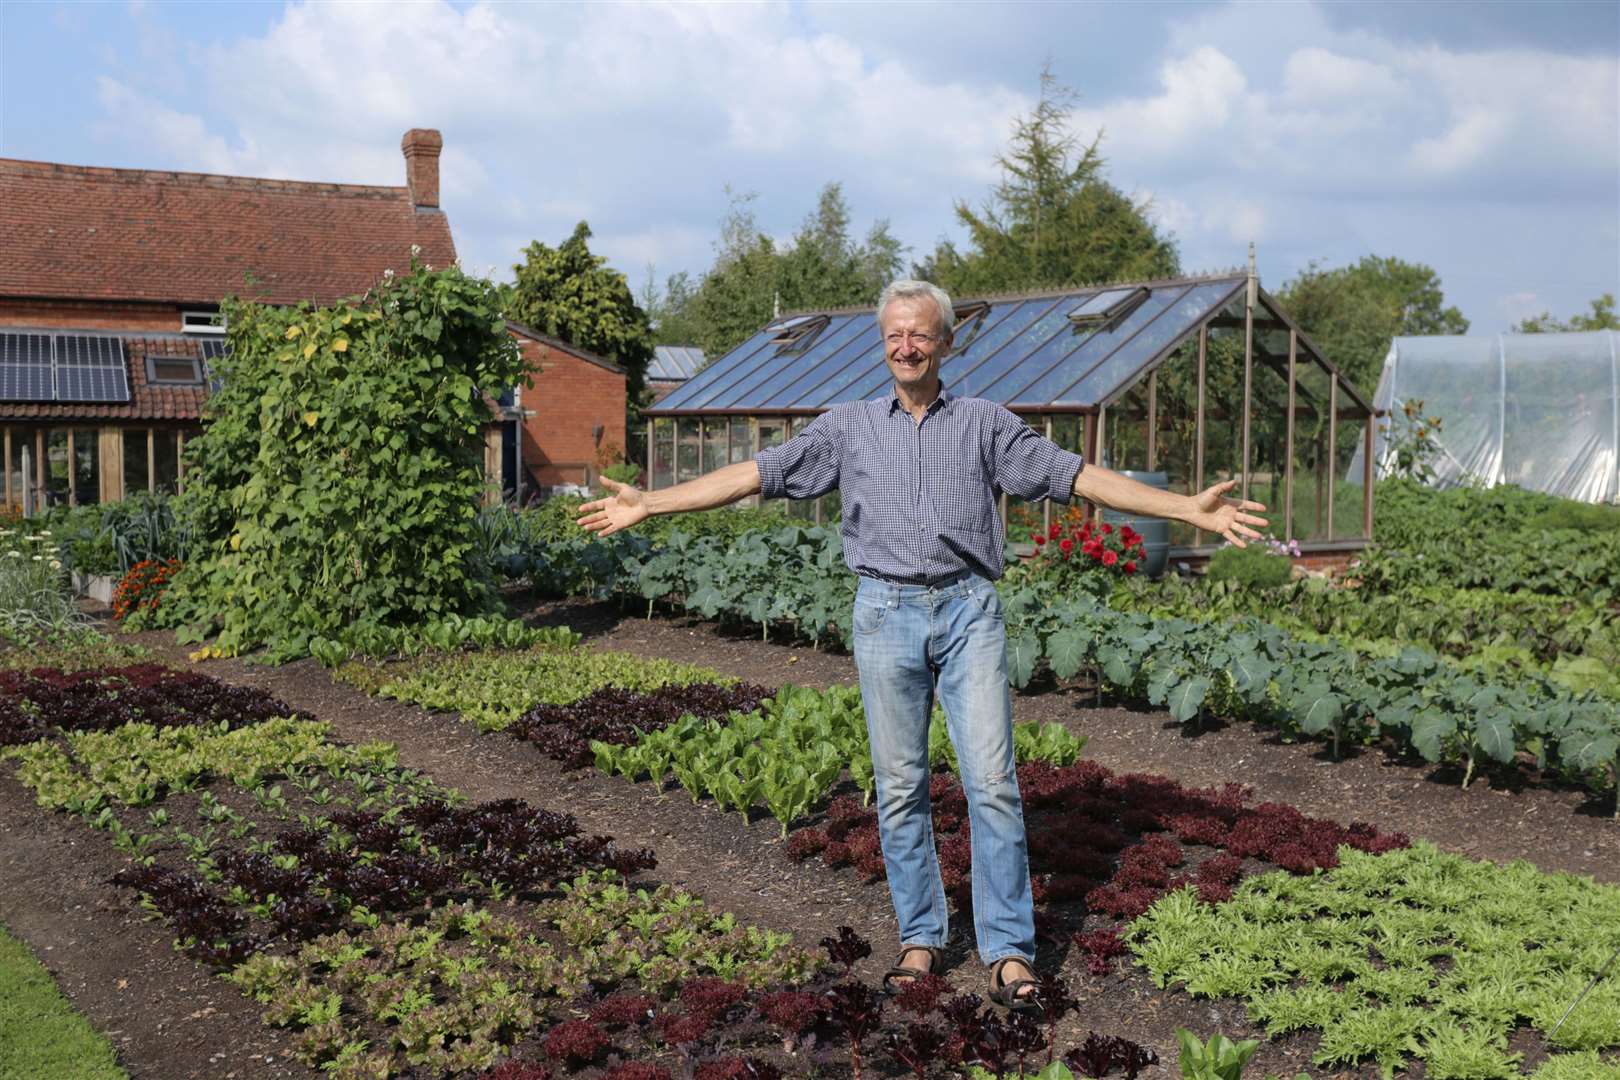 Charles Dowding in his no dig garden. Picture: Charles Dowding/PA